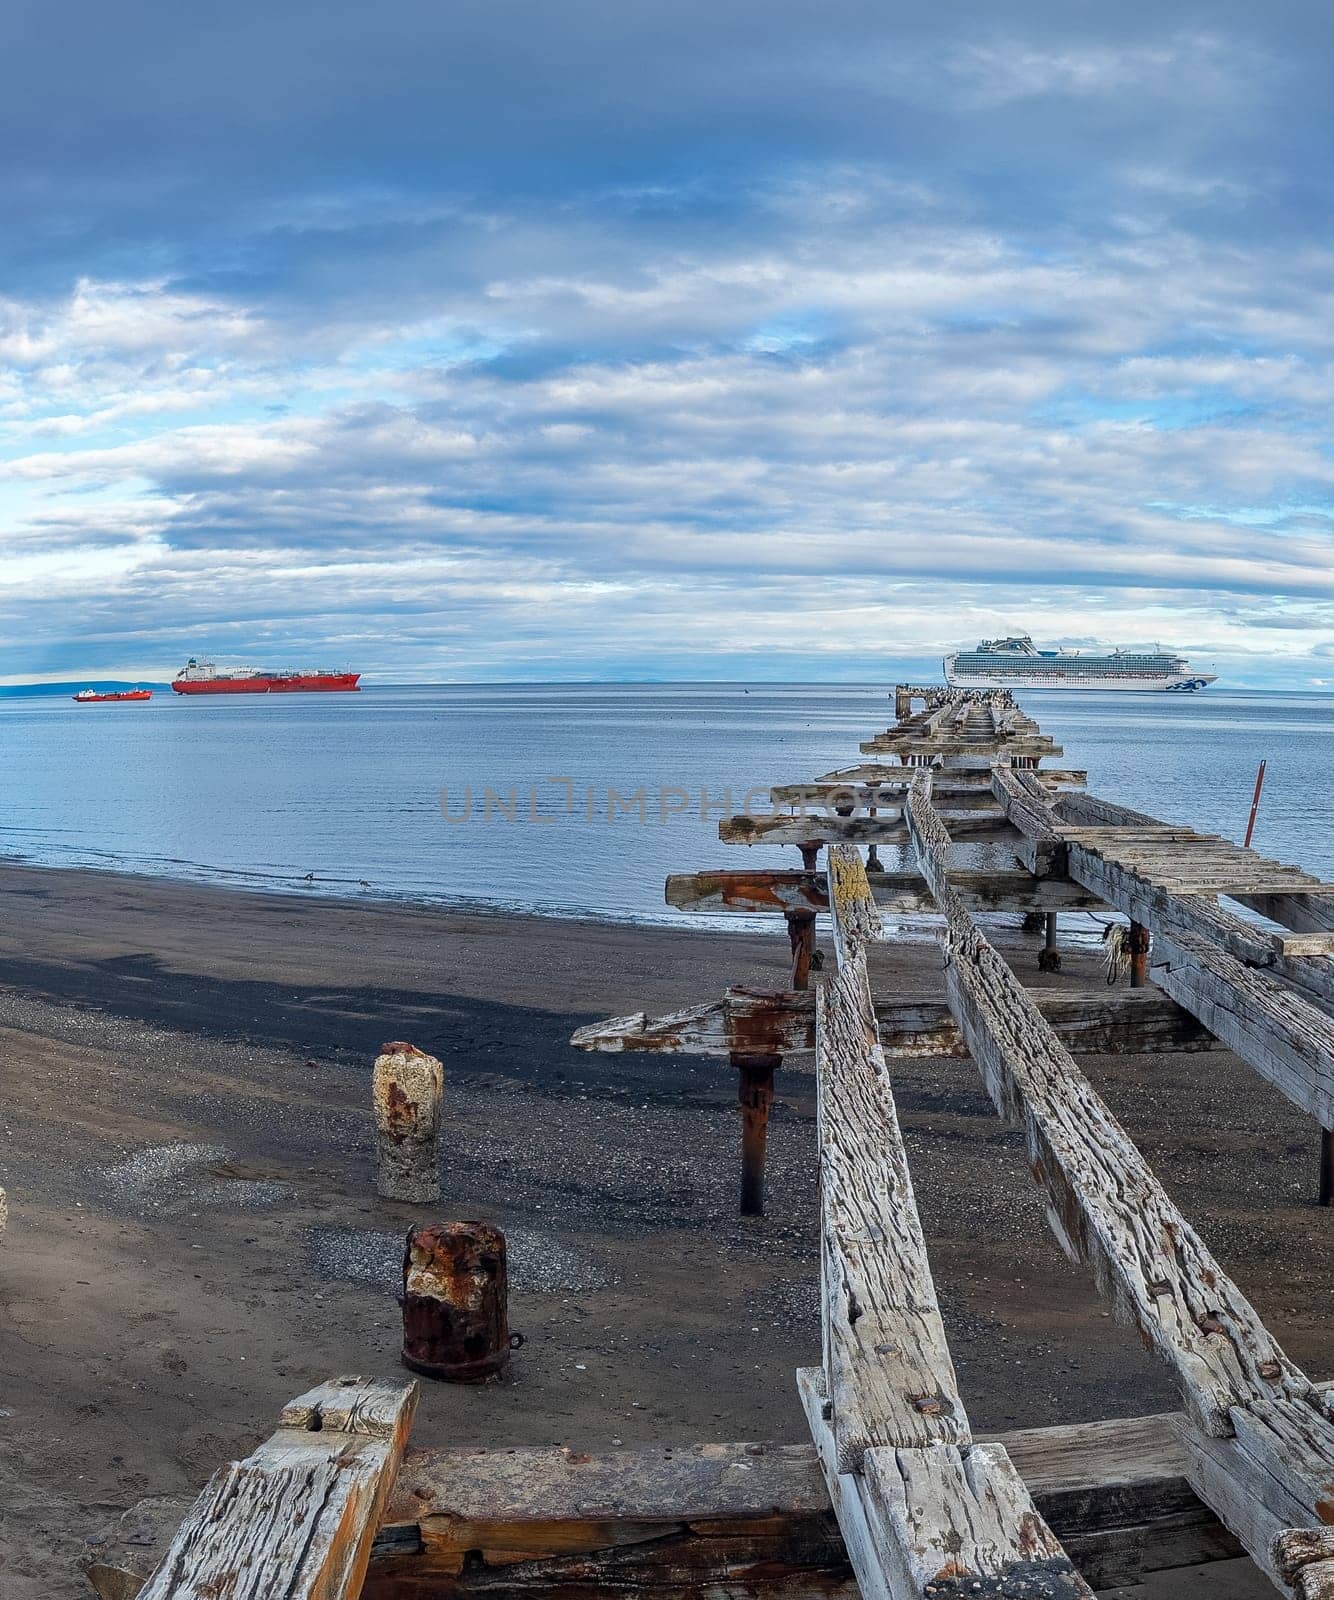 Rustic Wooden Pier Leading to Tranquil Sea with Ships by FerradalFCG